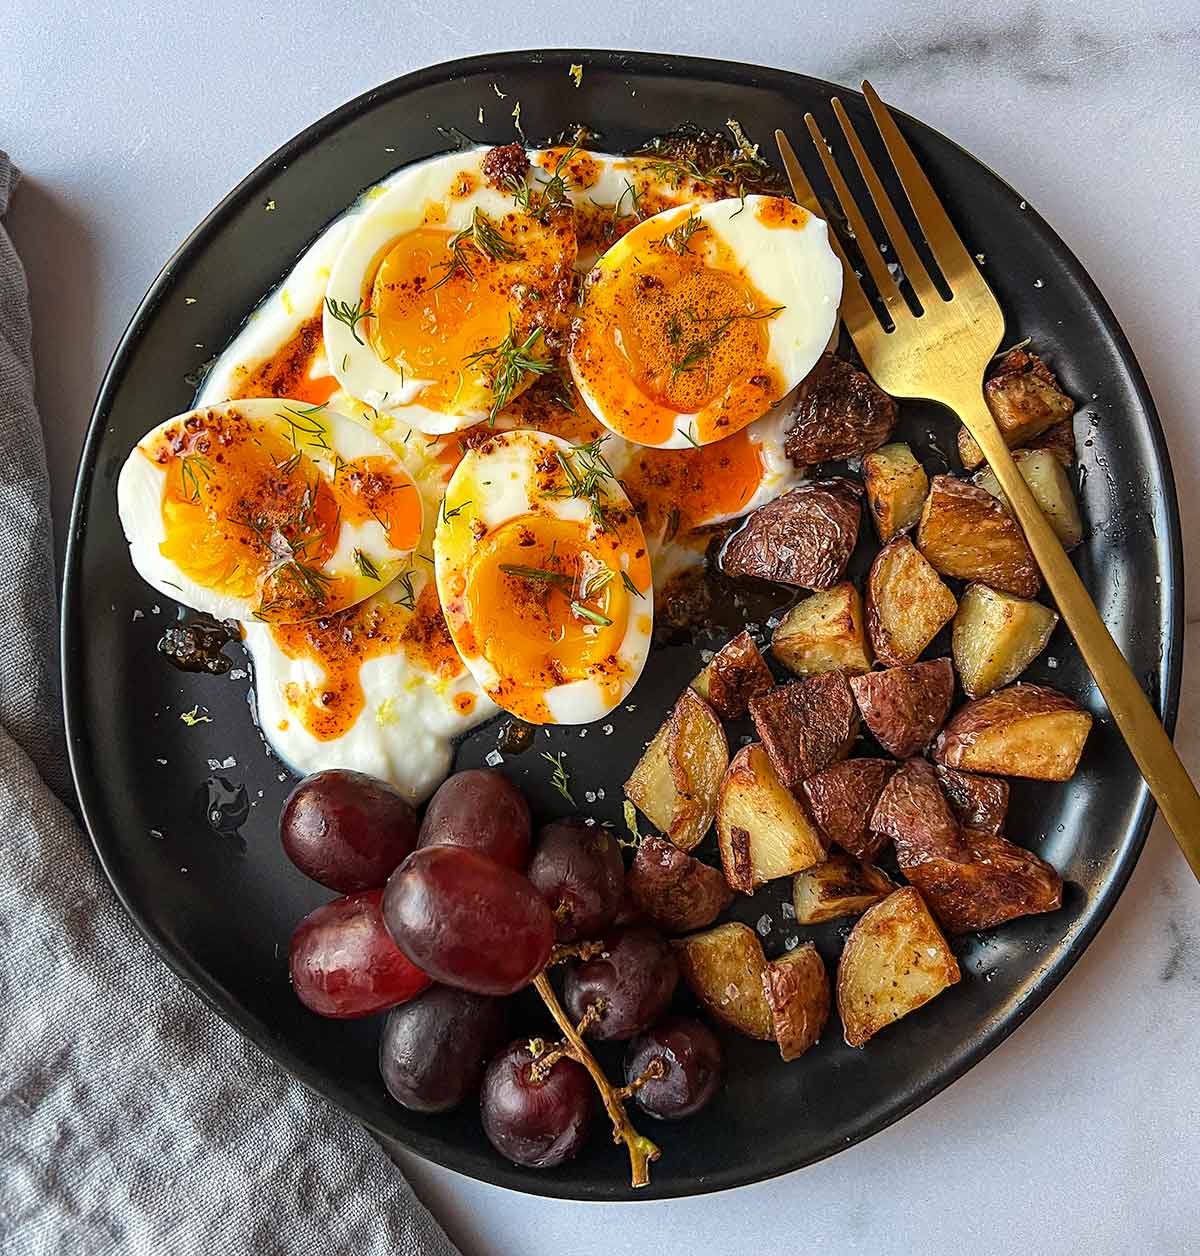 jammy eggs in yogurt roasted potatoes and red grapes on black plate with grey napkin and gold fork